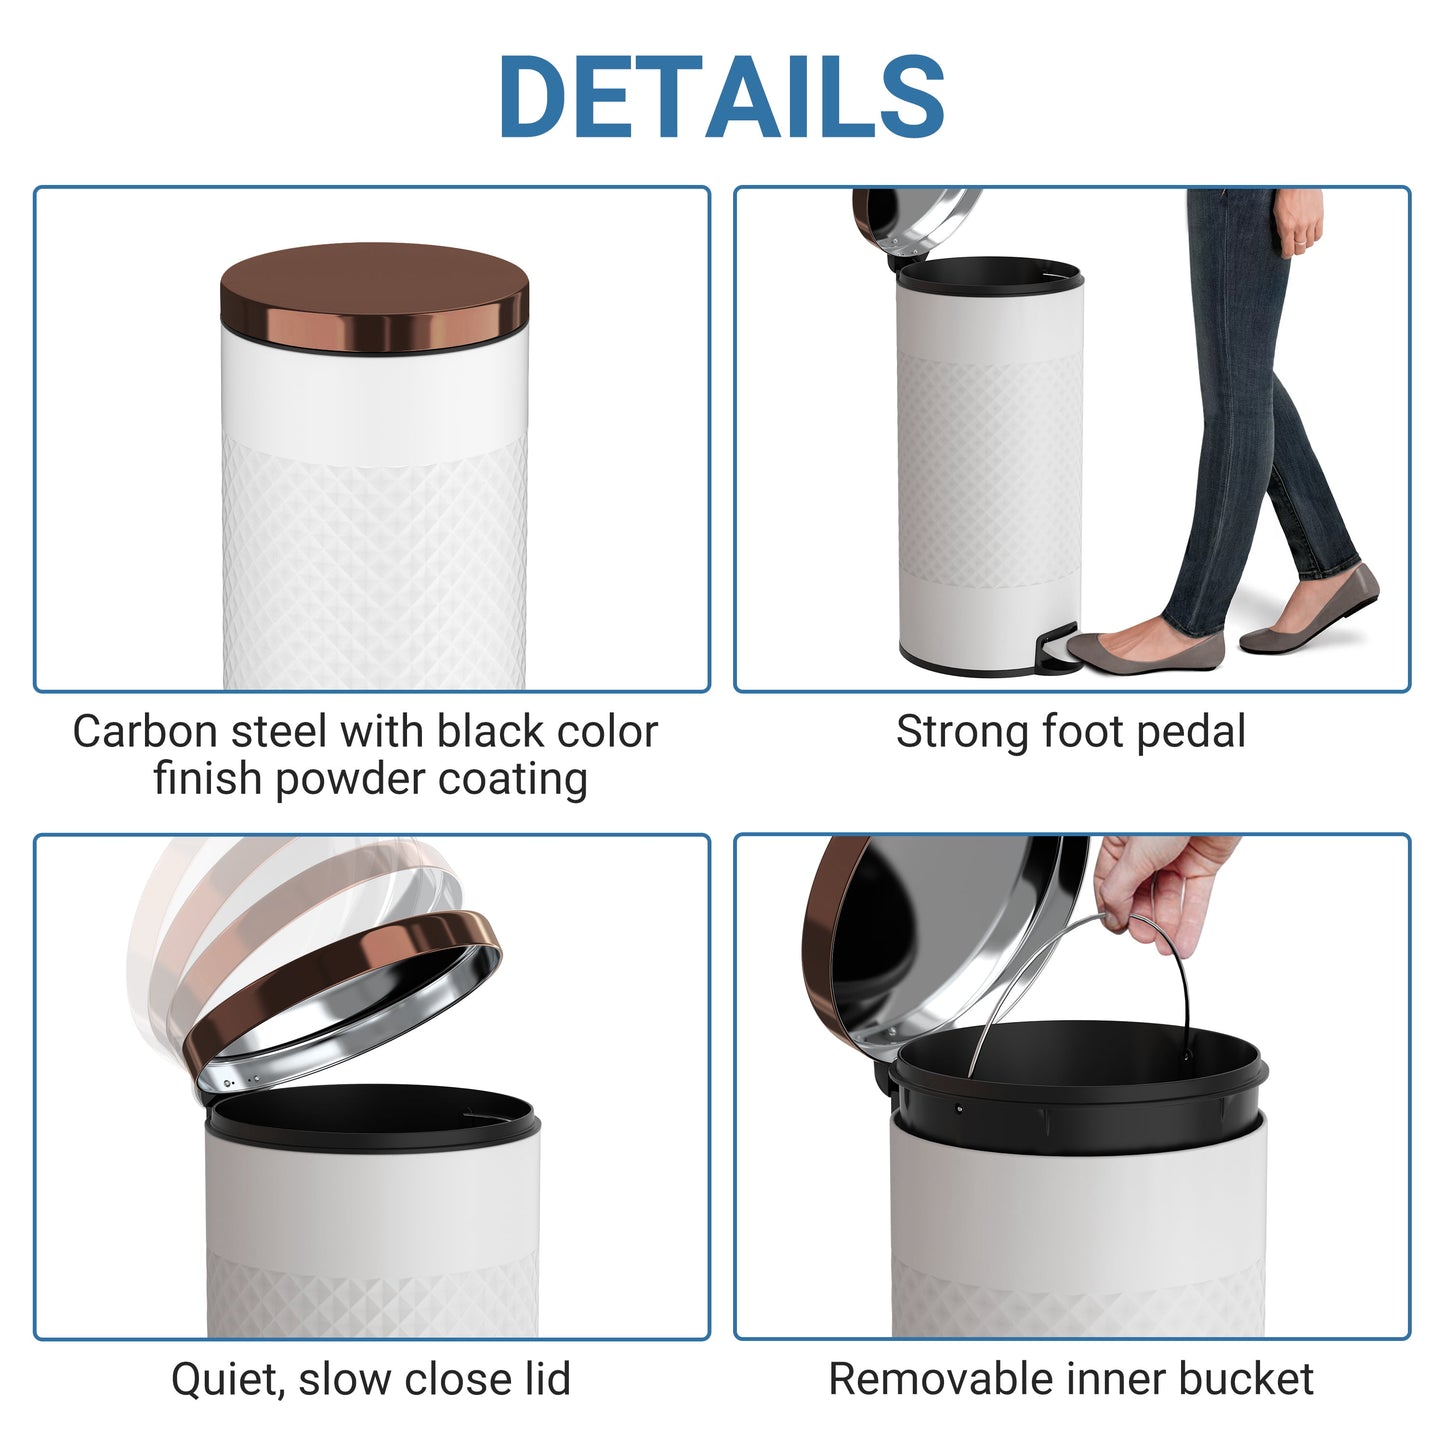 Innovaze 8 gal./30 Liter Carbon Steel Round Step-on Trash Can with Diamond Body for Kitchen, Black